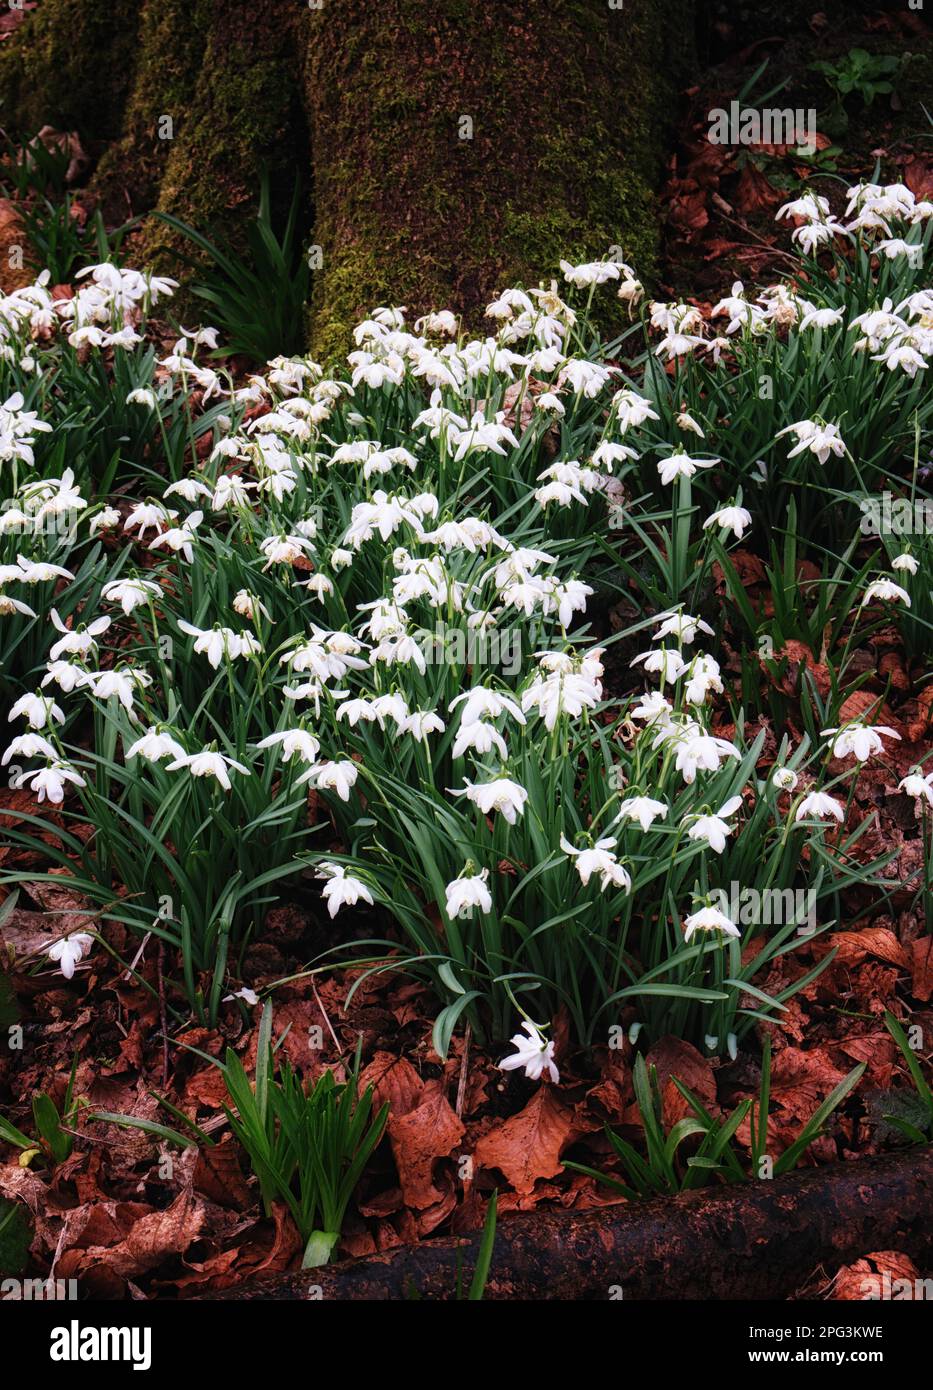 A close-up view of snowdrops, juxtaposed with tree trunks Stock Photo